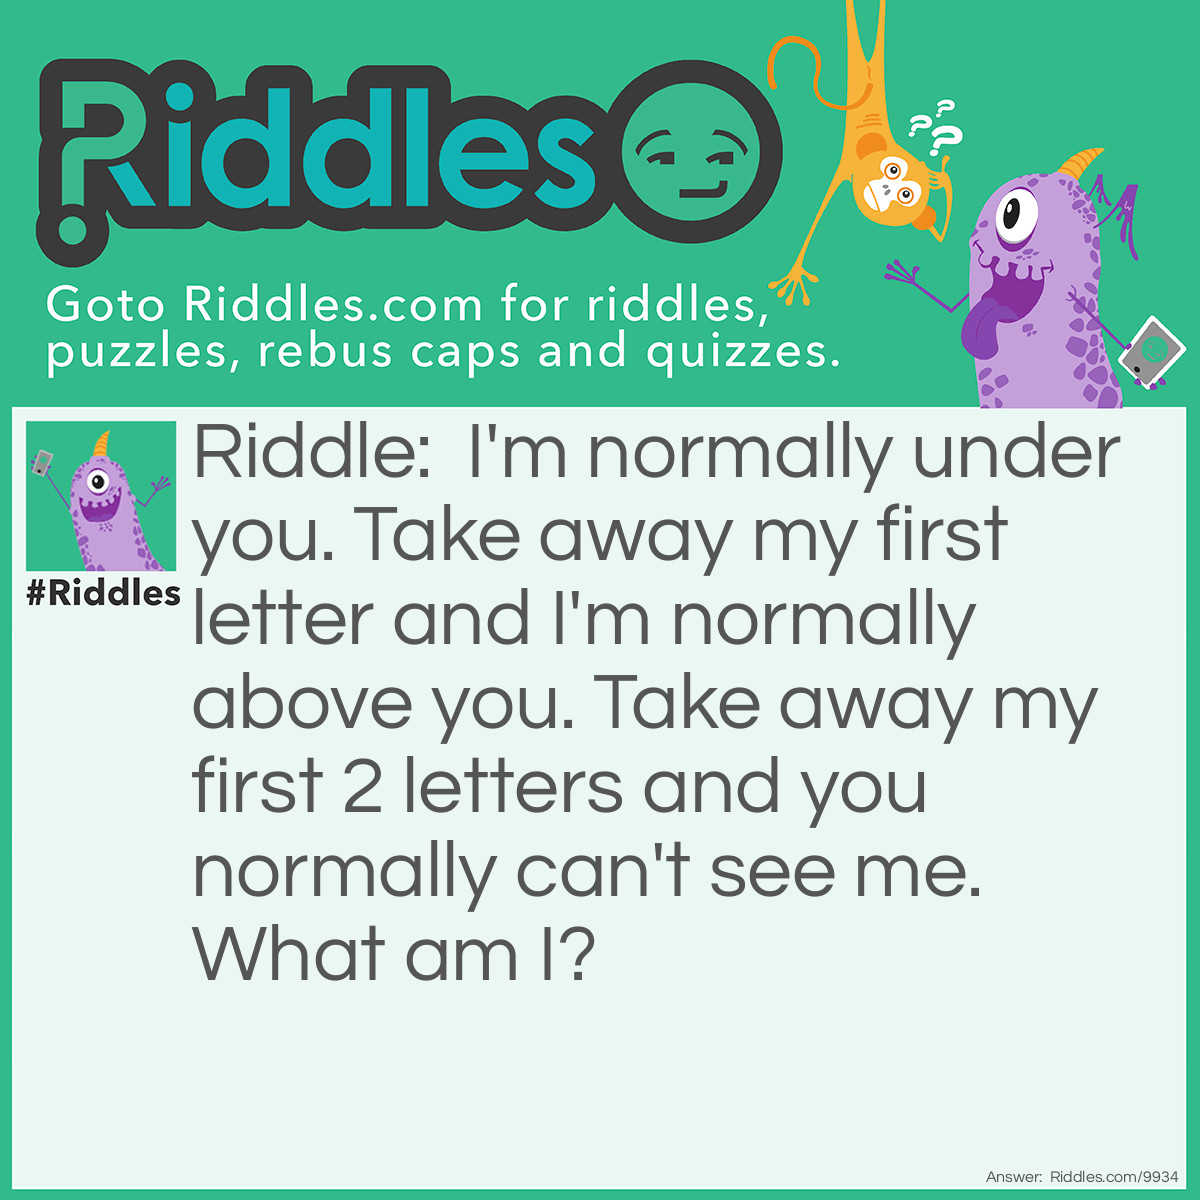 Riddle: I'm normally under you. Take away my first letter and I'm normally above you. Take away my first 2 letters and you normally can't see me. What am I? Answer: Chair.